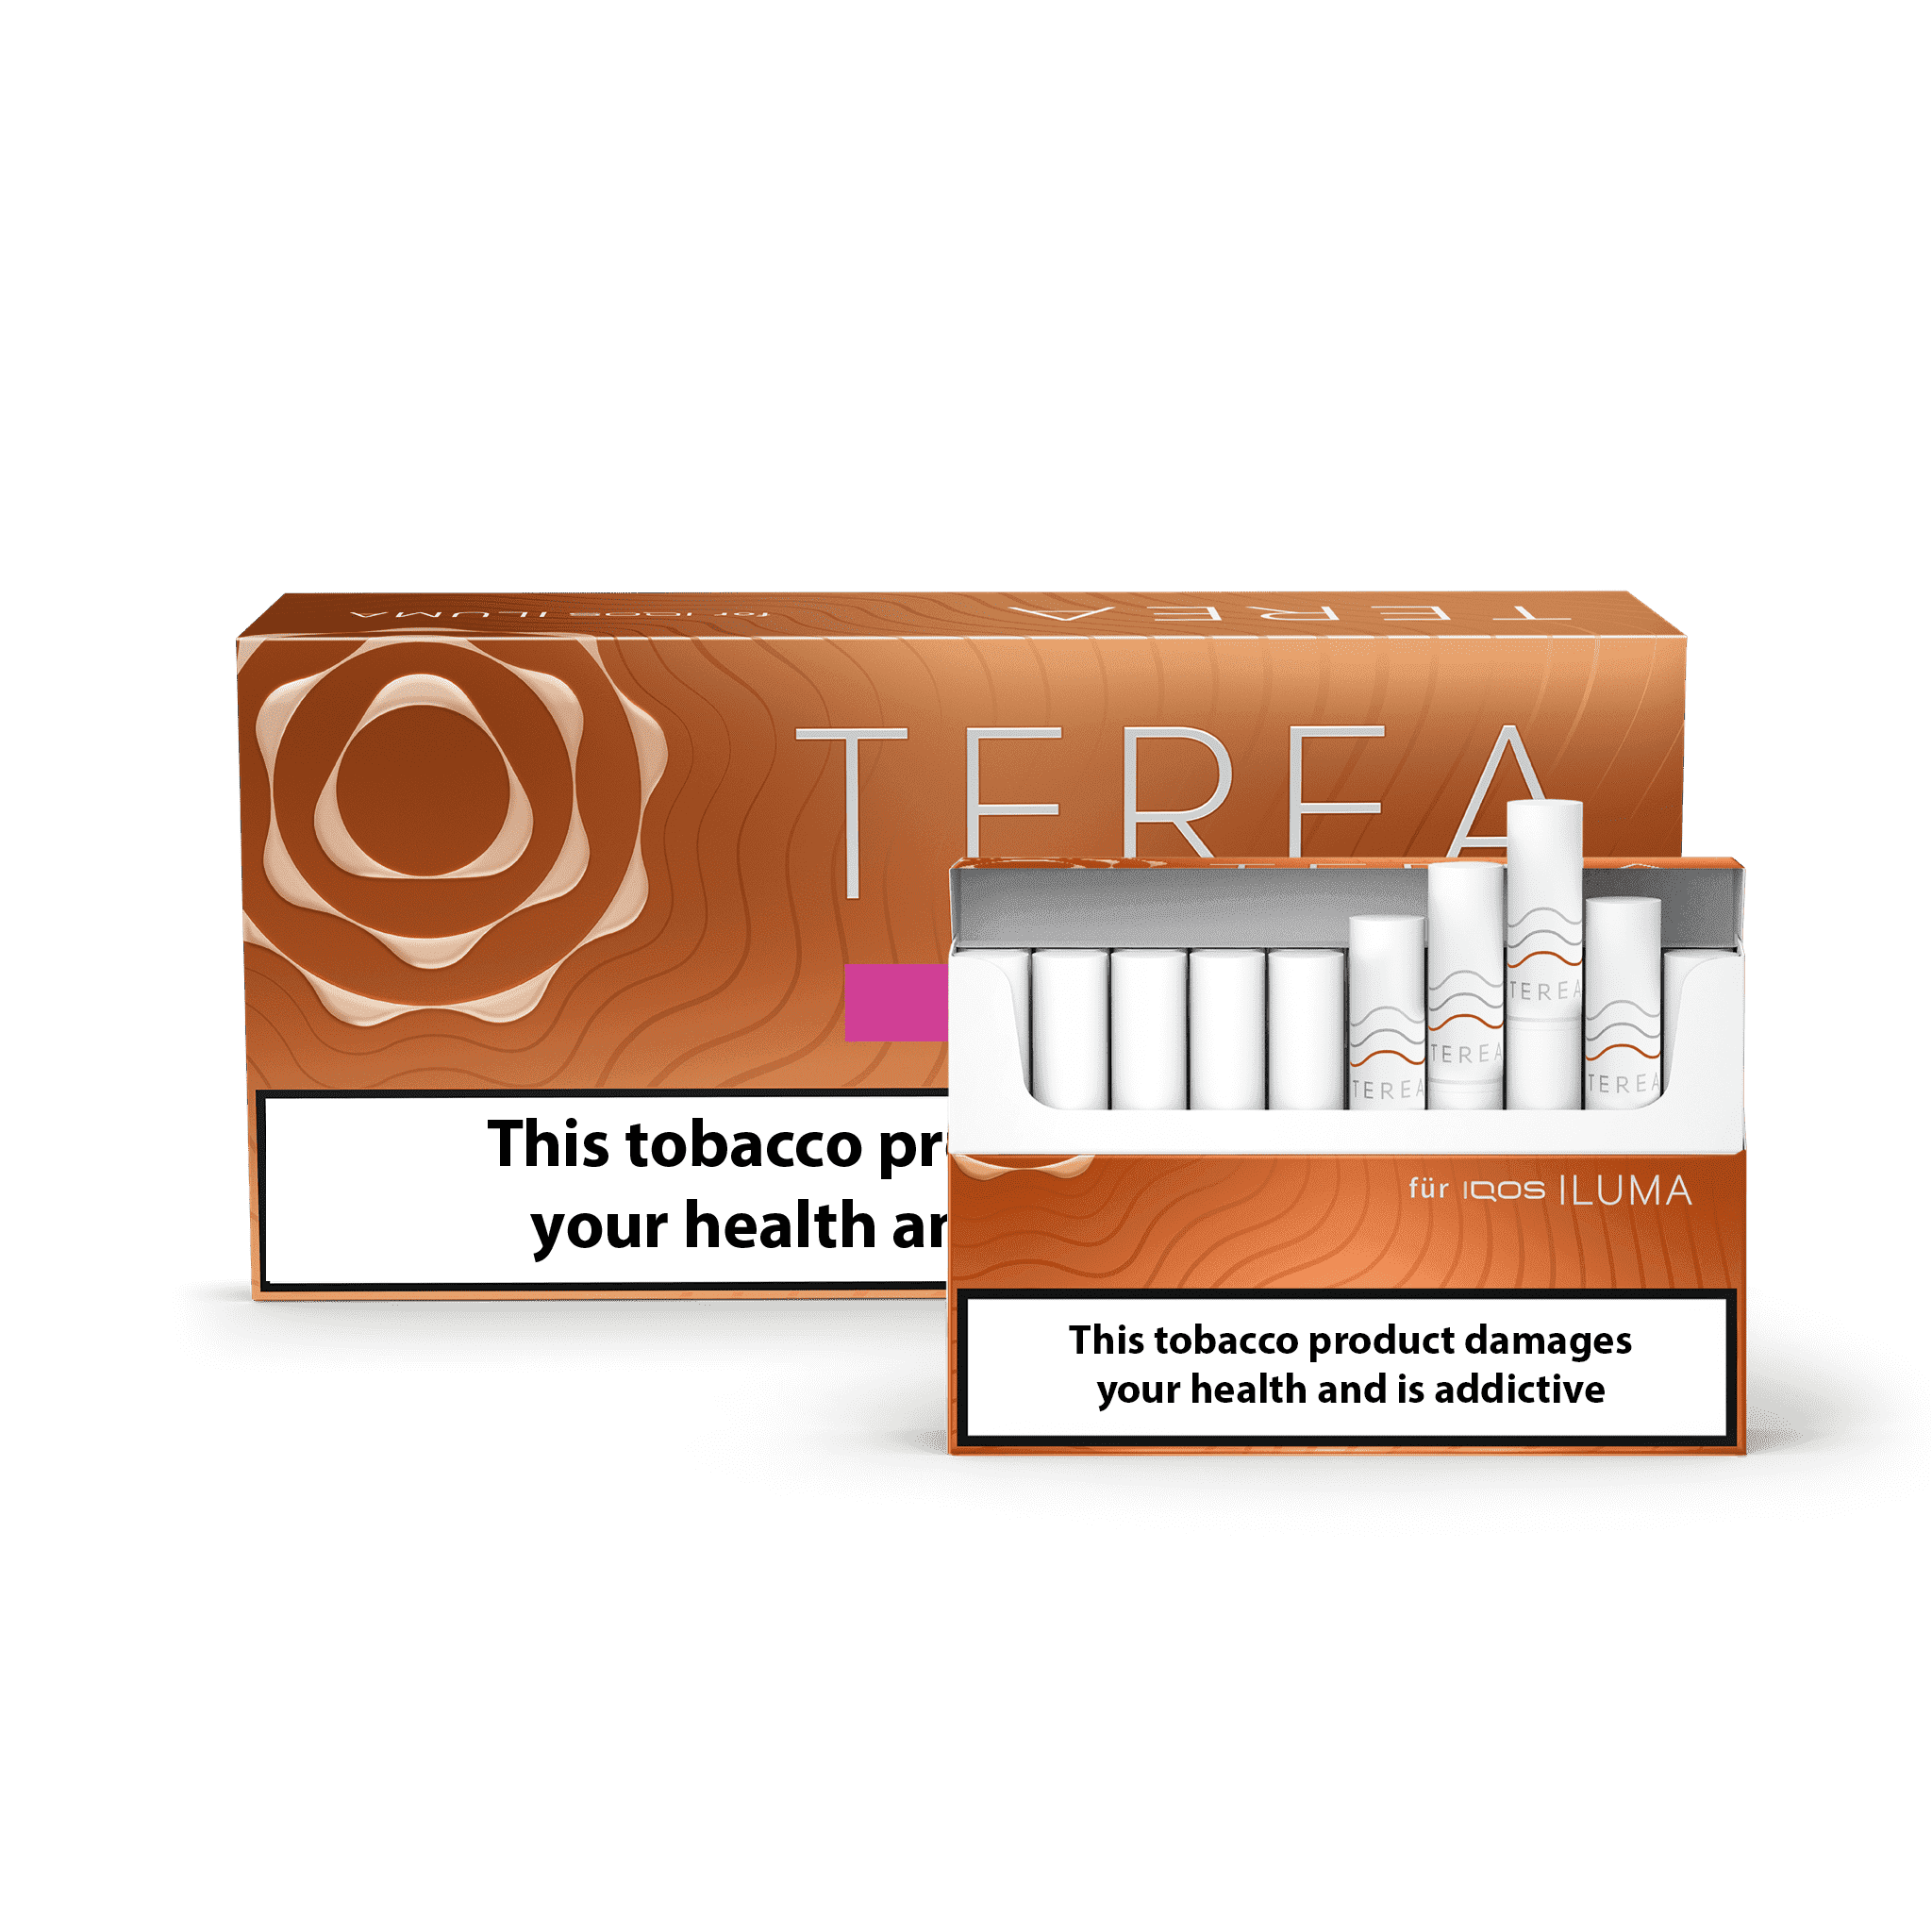 TEREA Amber Tobacco Sticks for the IQOS Iluma Device (Pack of 20)